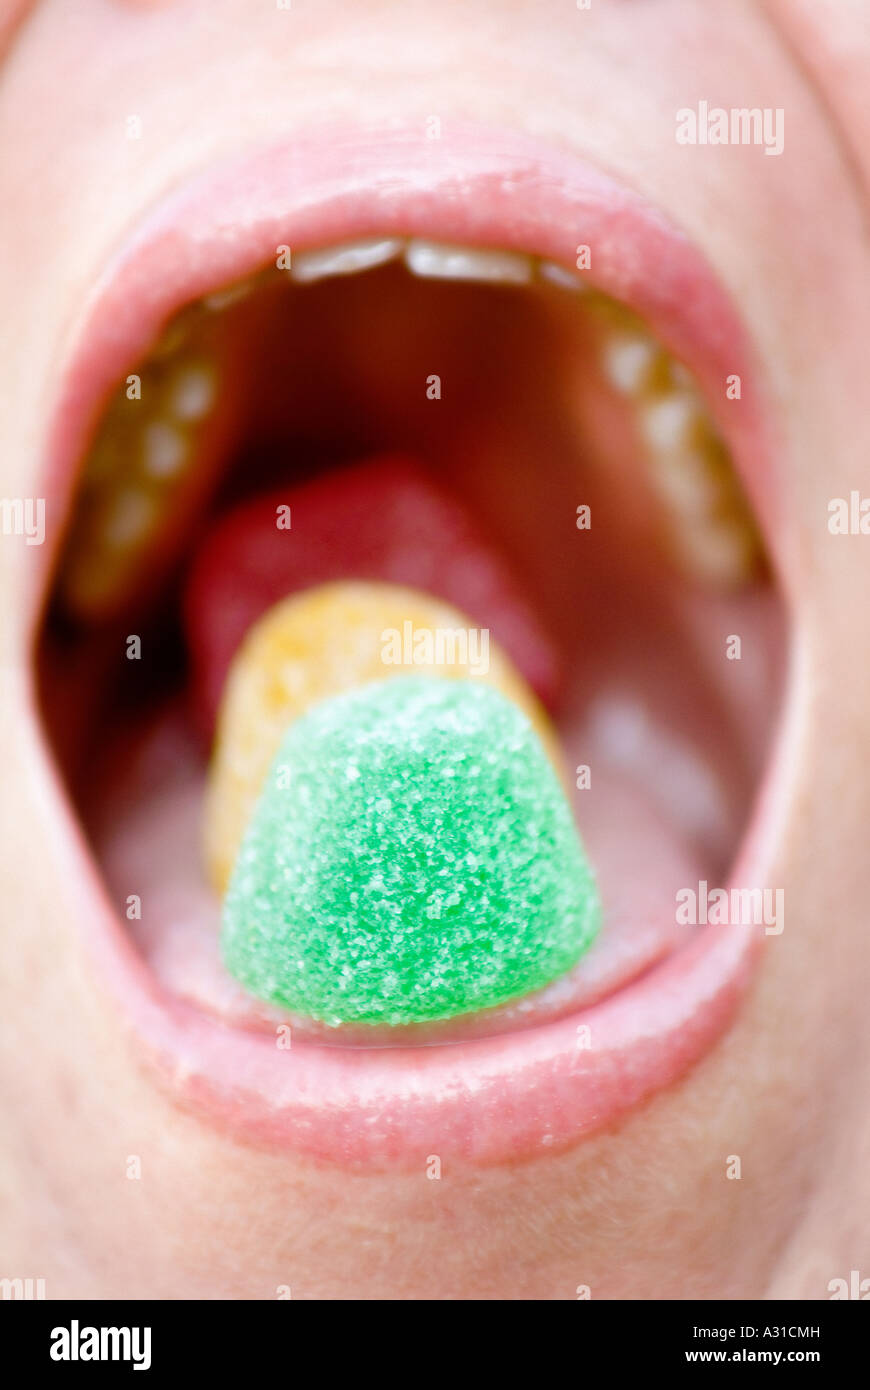 Close up of mouth with sugarcoats Stock Photo